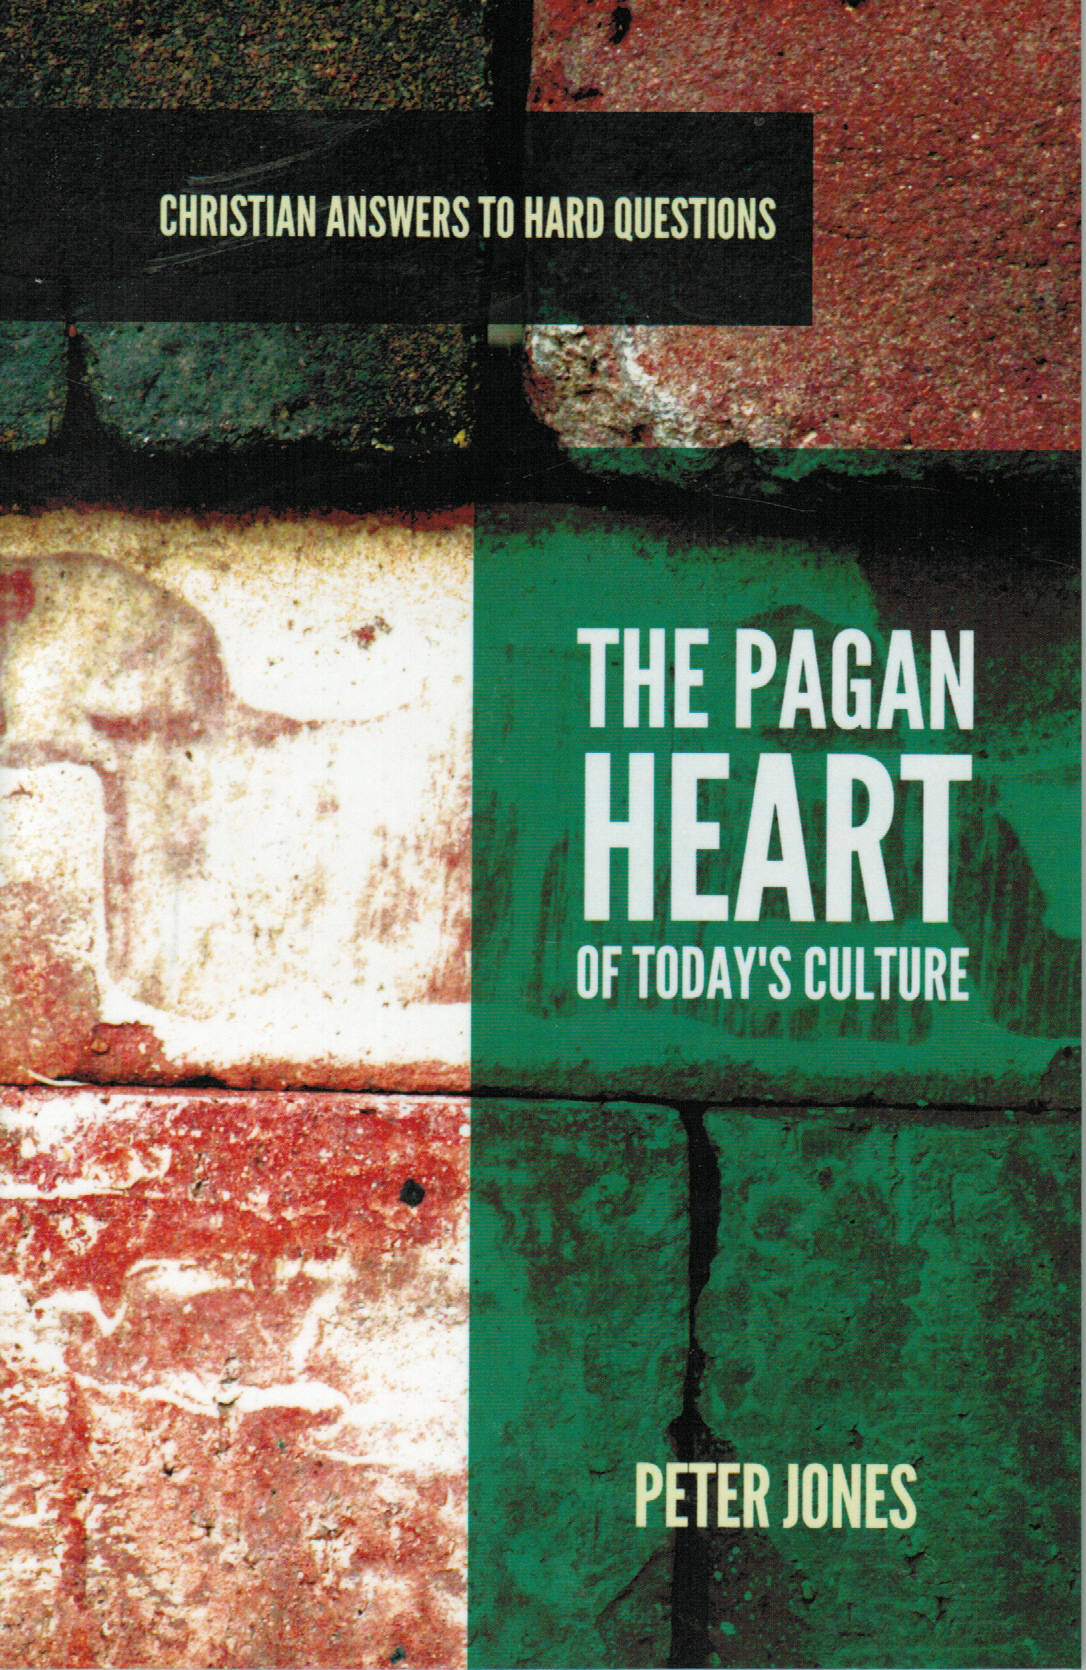 Christian Answers to Hard Questions - The Pagan Heart of Today's Culture